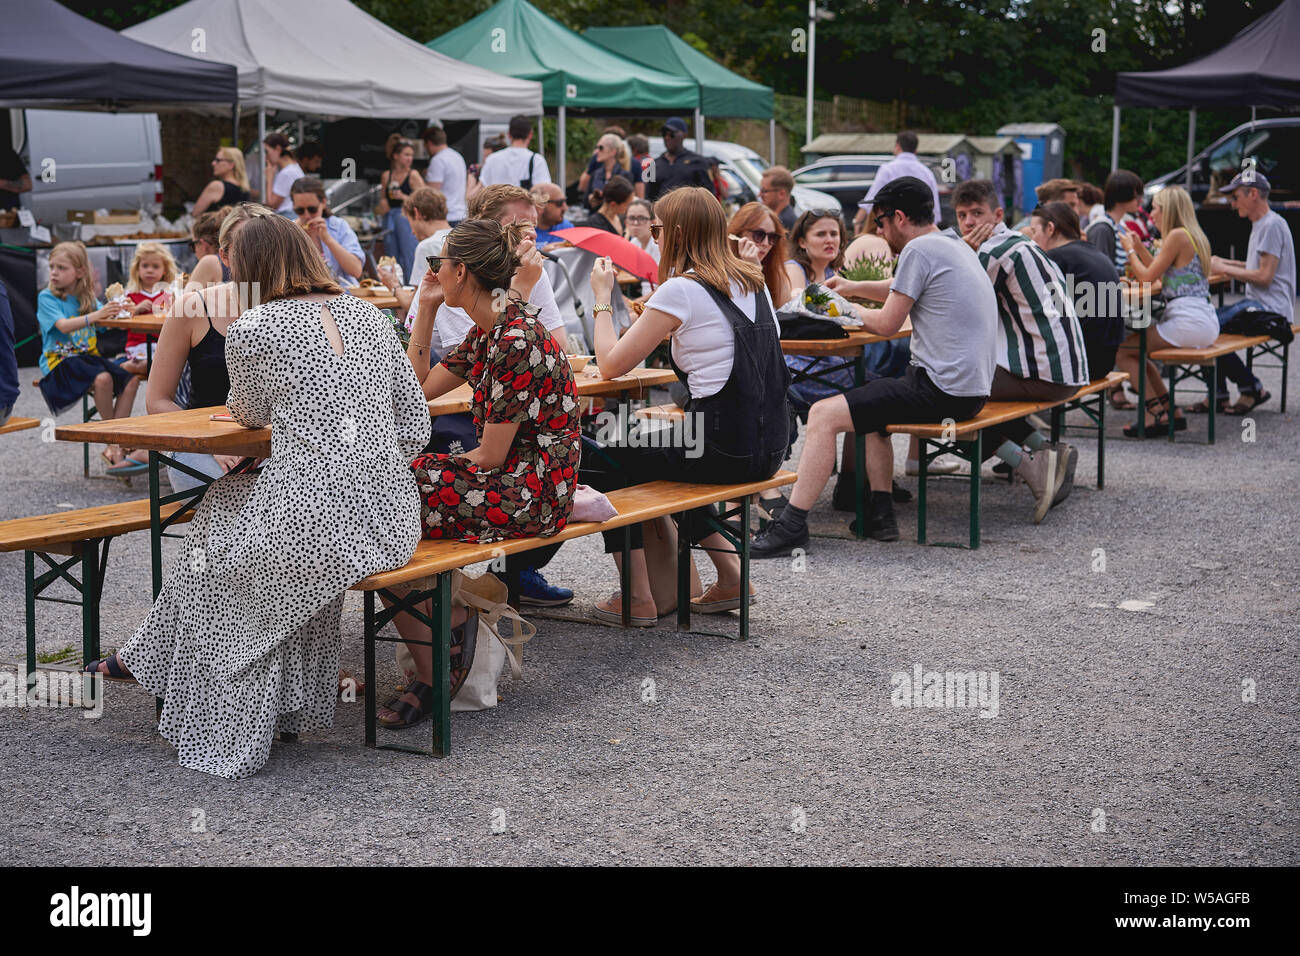 London, UK - July, 2019. People shopping and drinking at Brockley Market, a local farmer's market held every Saturday in Lewisham. Stock Photo